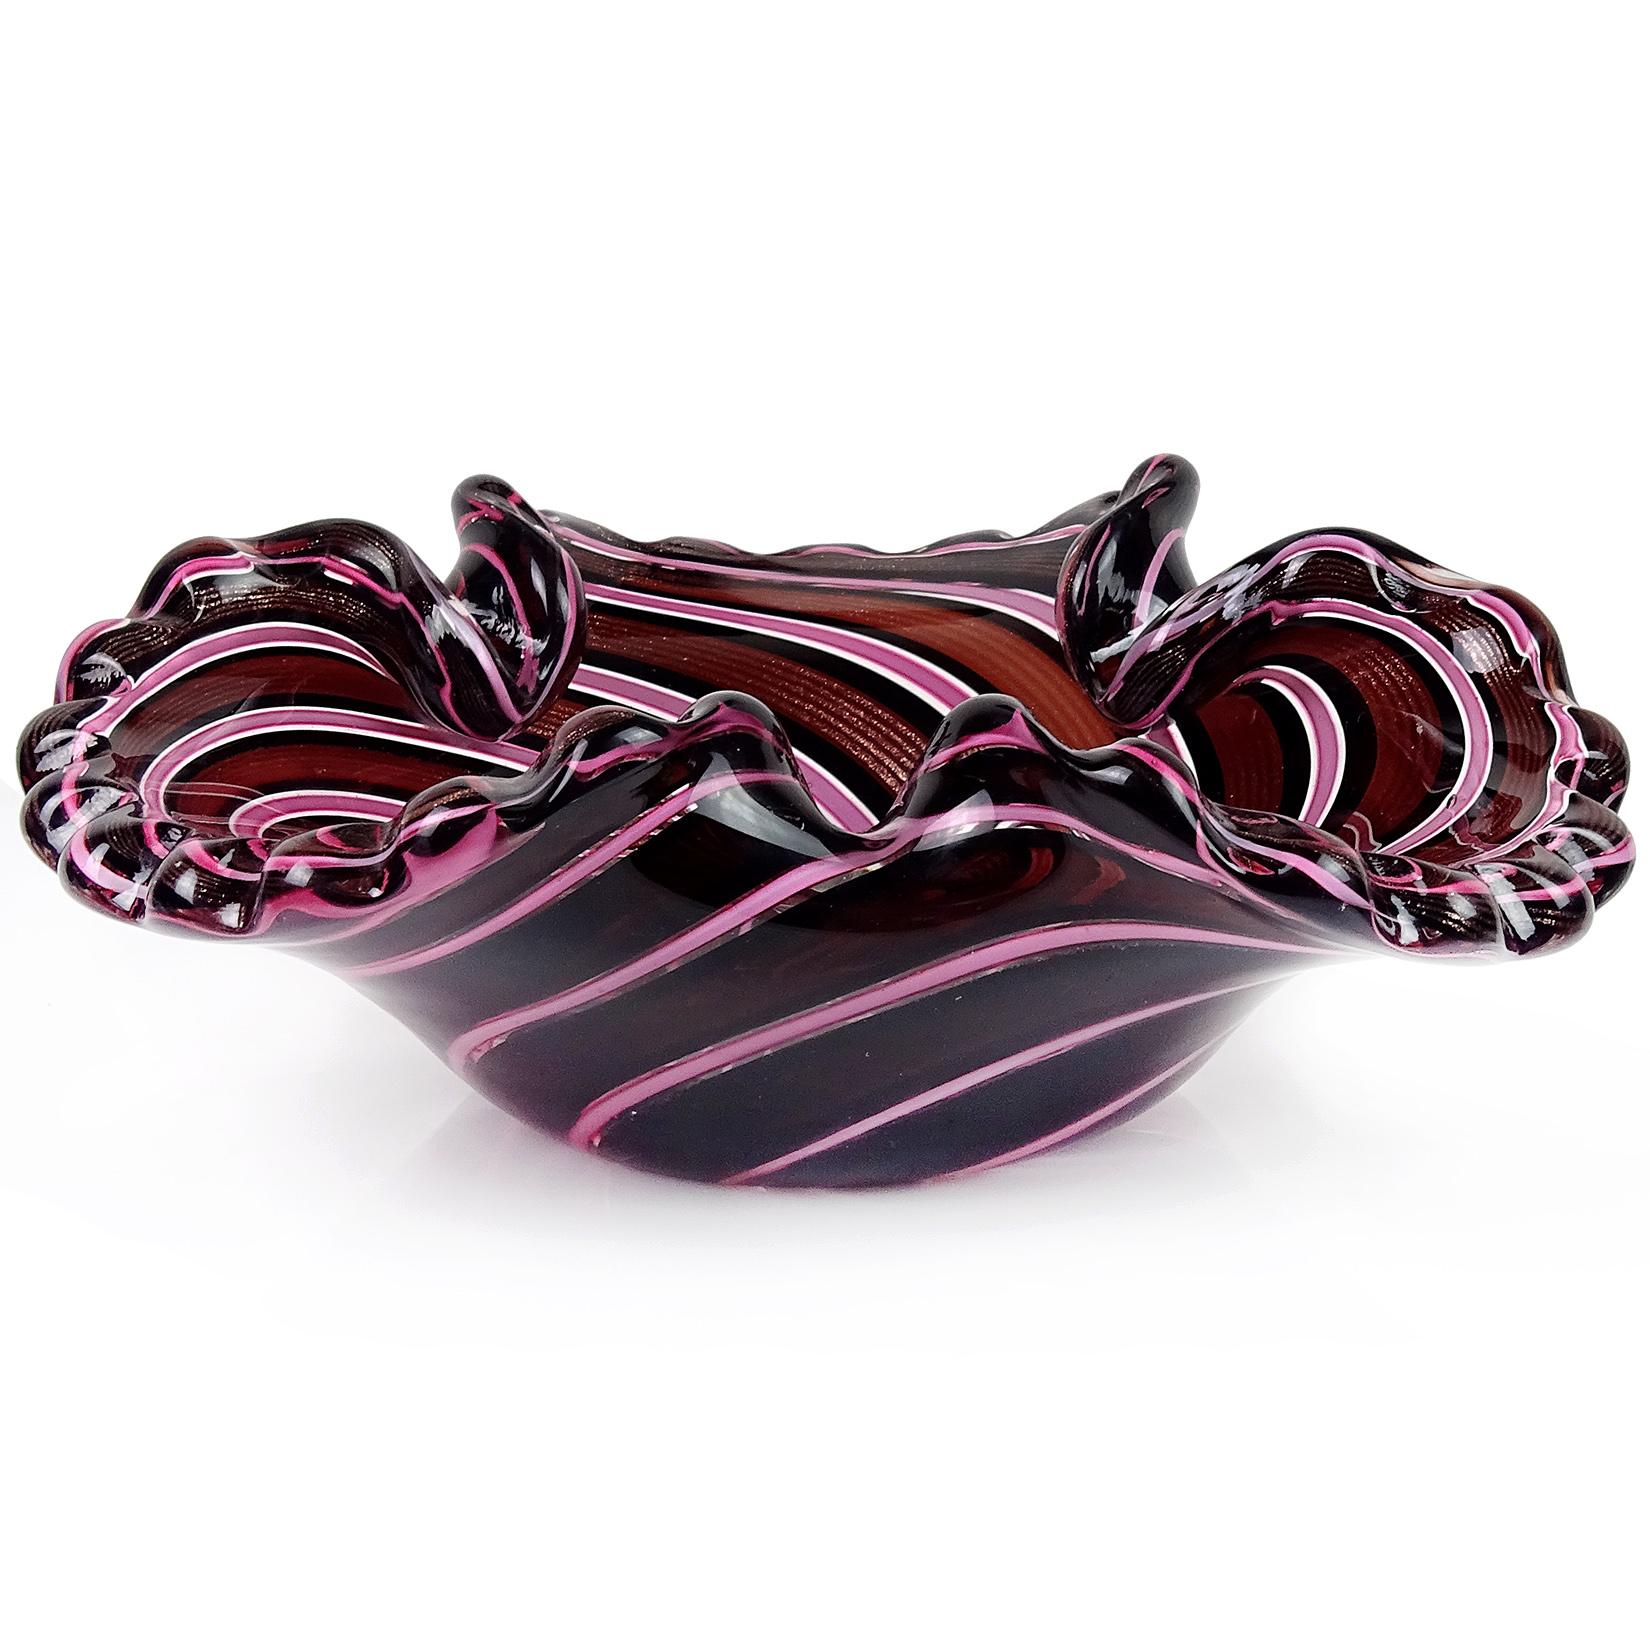 Only 1 Left! Beautiful vintage Murano pink, black and dark wine color with copper aventurine ribbons Italian art glass decorative bowl. It has a crimped rim with three folds along the edge. The bowl still retains the original 